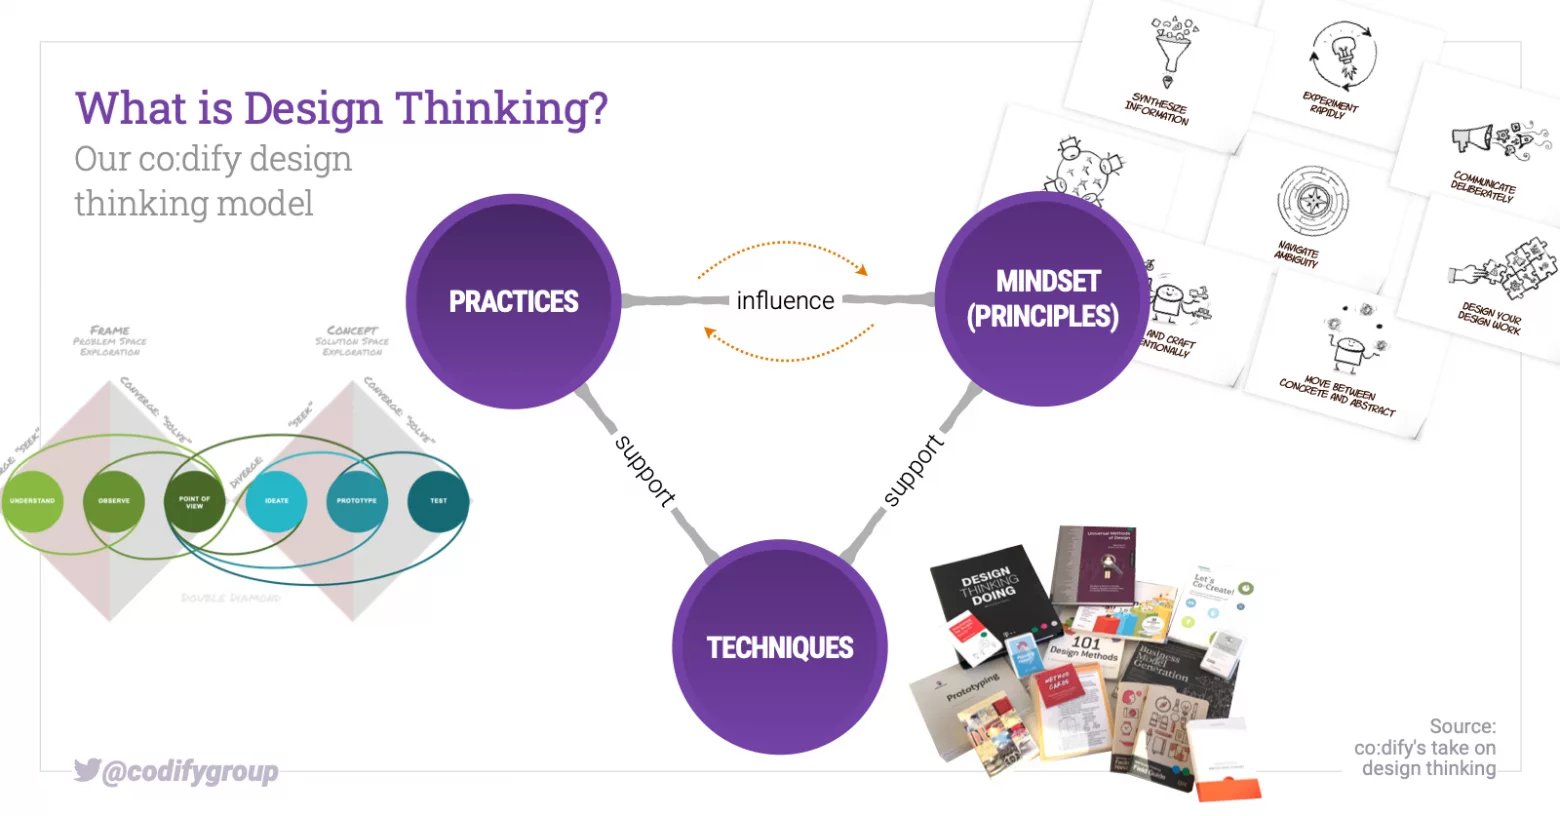 The design thinking model we use at co:dify